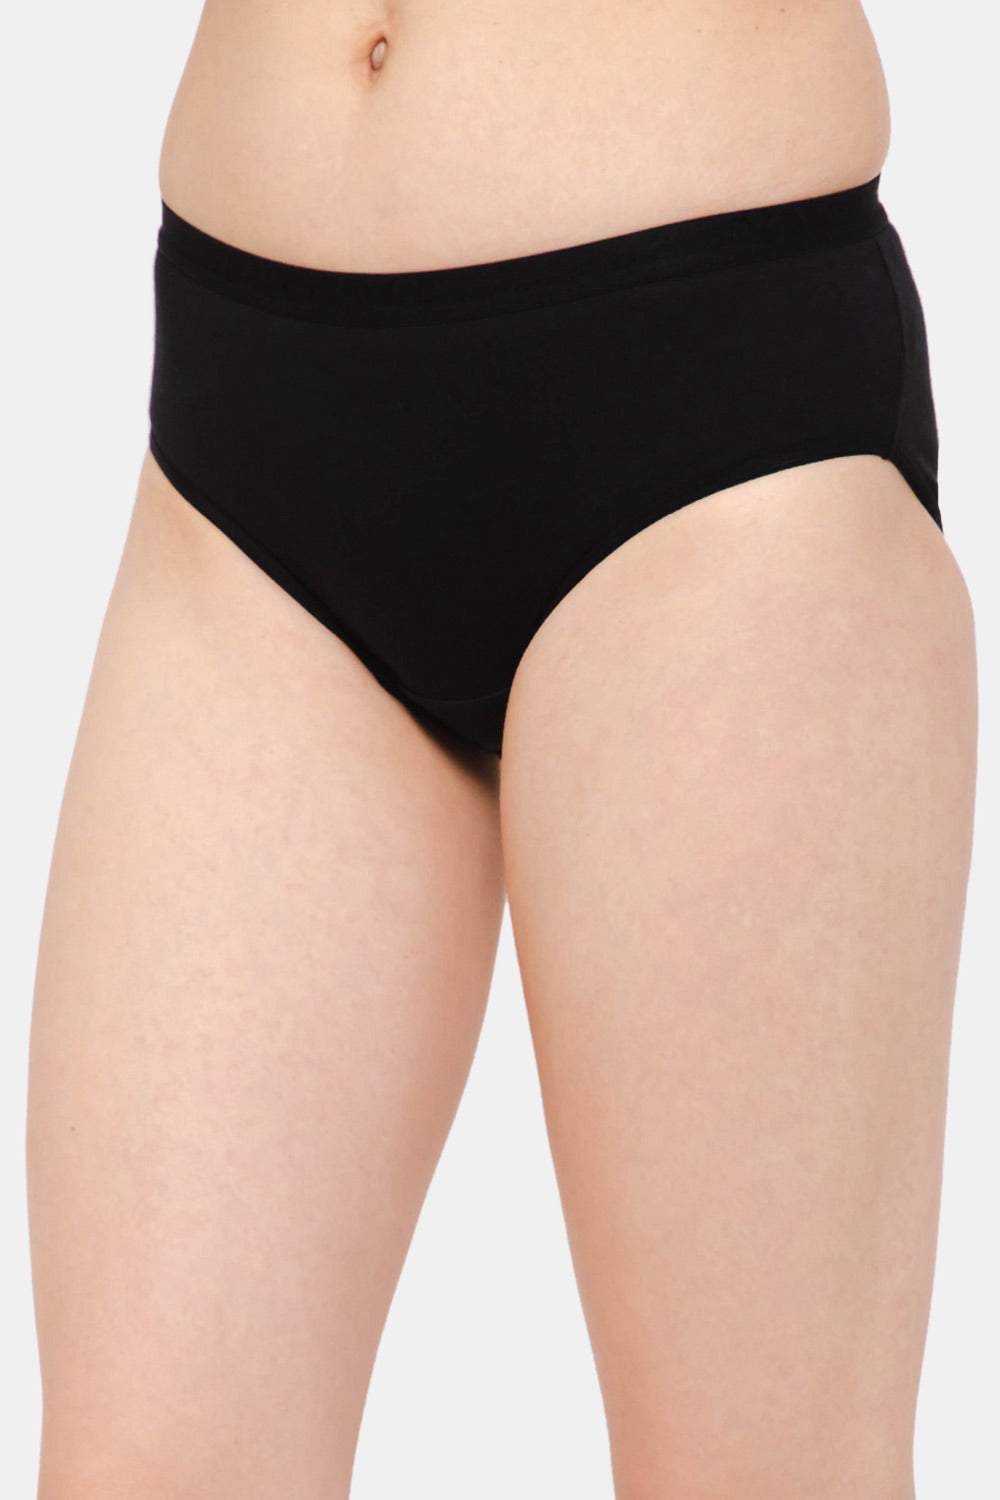 Plus Size Cotton Panties | High Waist | Full Hip Coverage | No Exposed  Elastic At Waist & Thigh Round | Prevents Friction | Pack Of 5